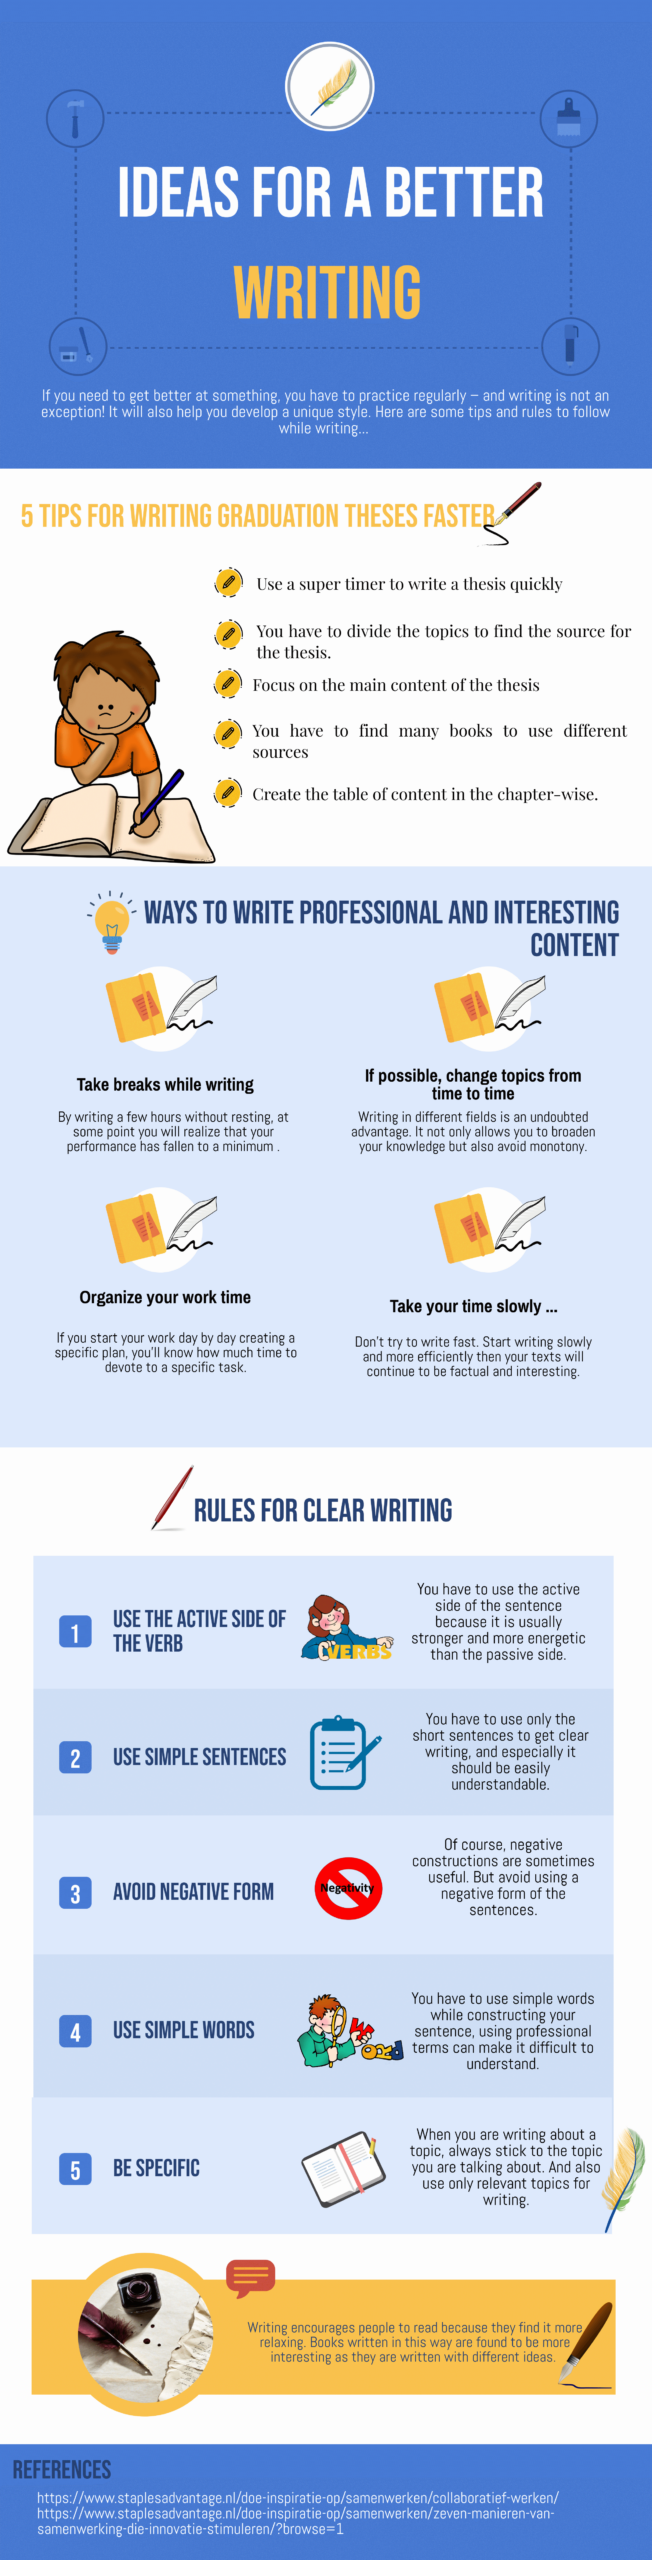 Ideas for a better writing infographic